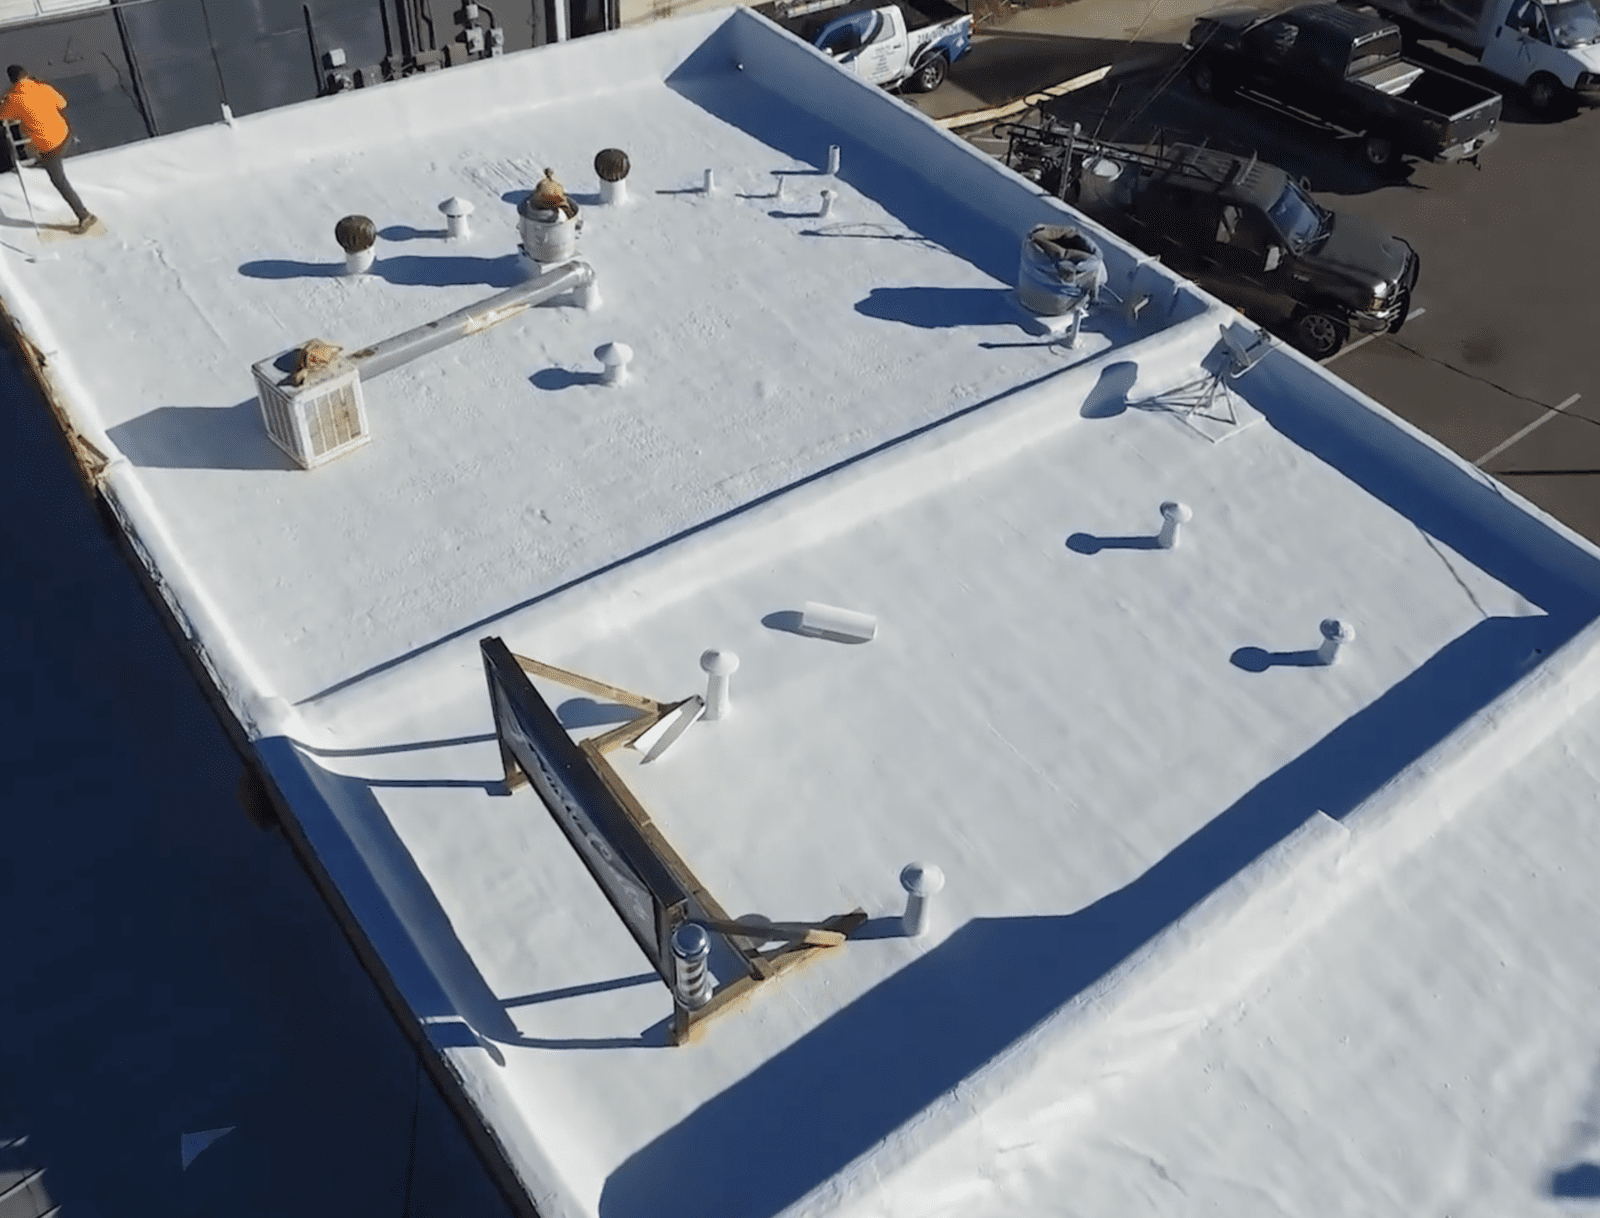 Tropical Roofing Silicone